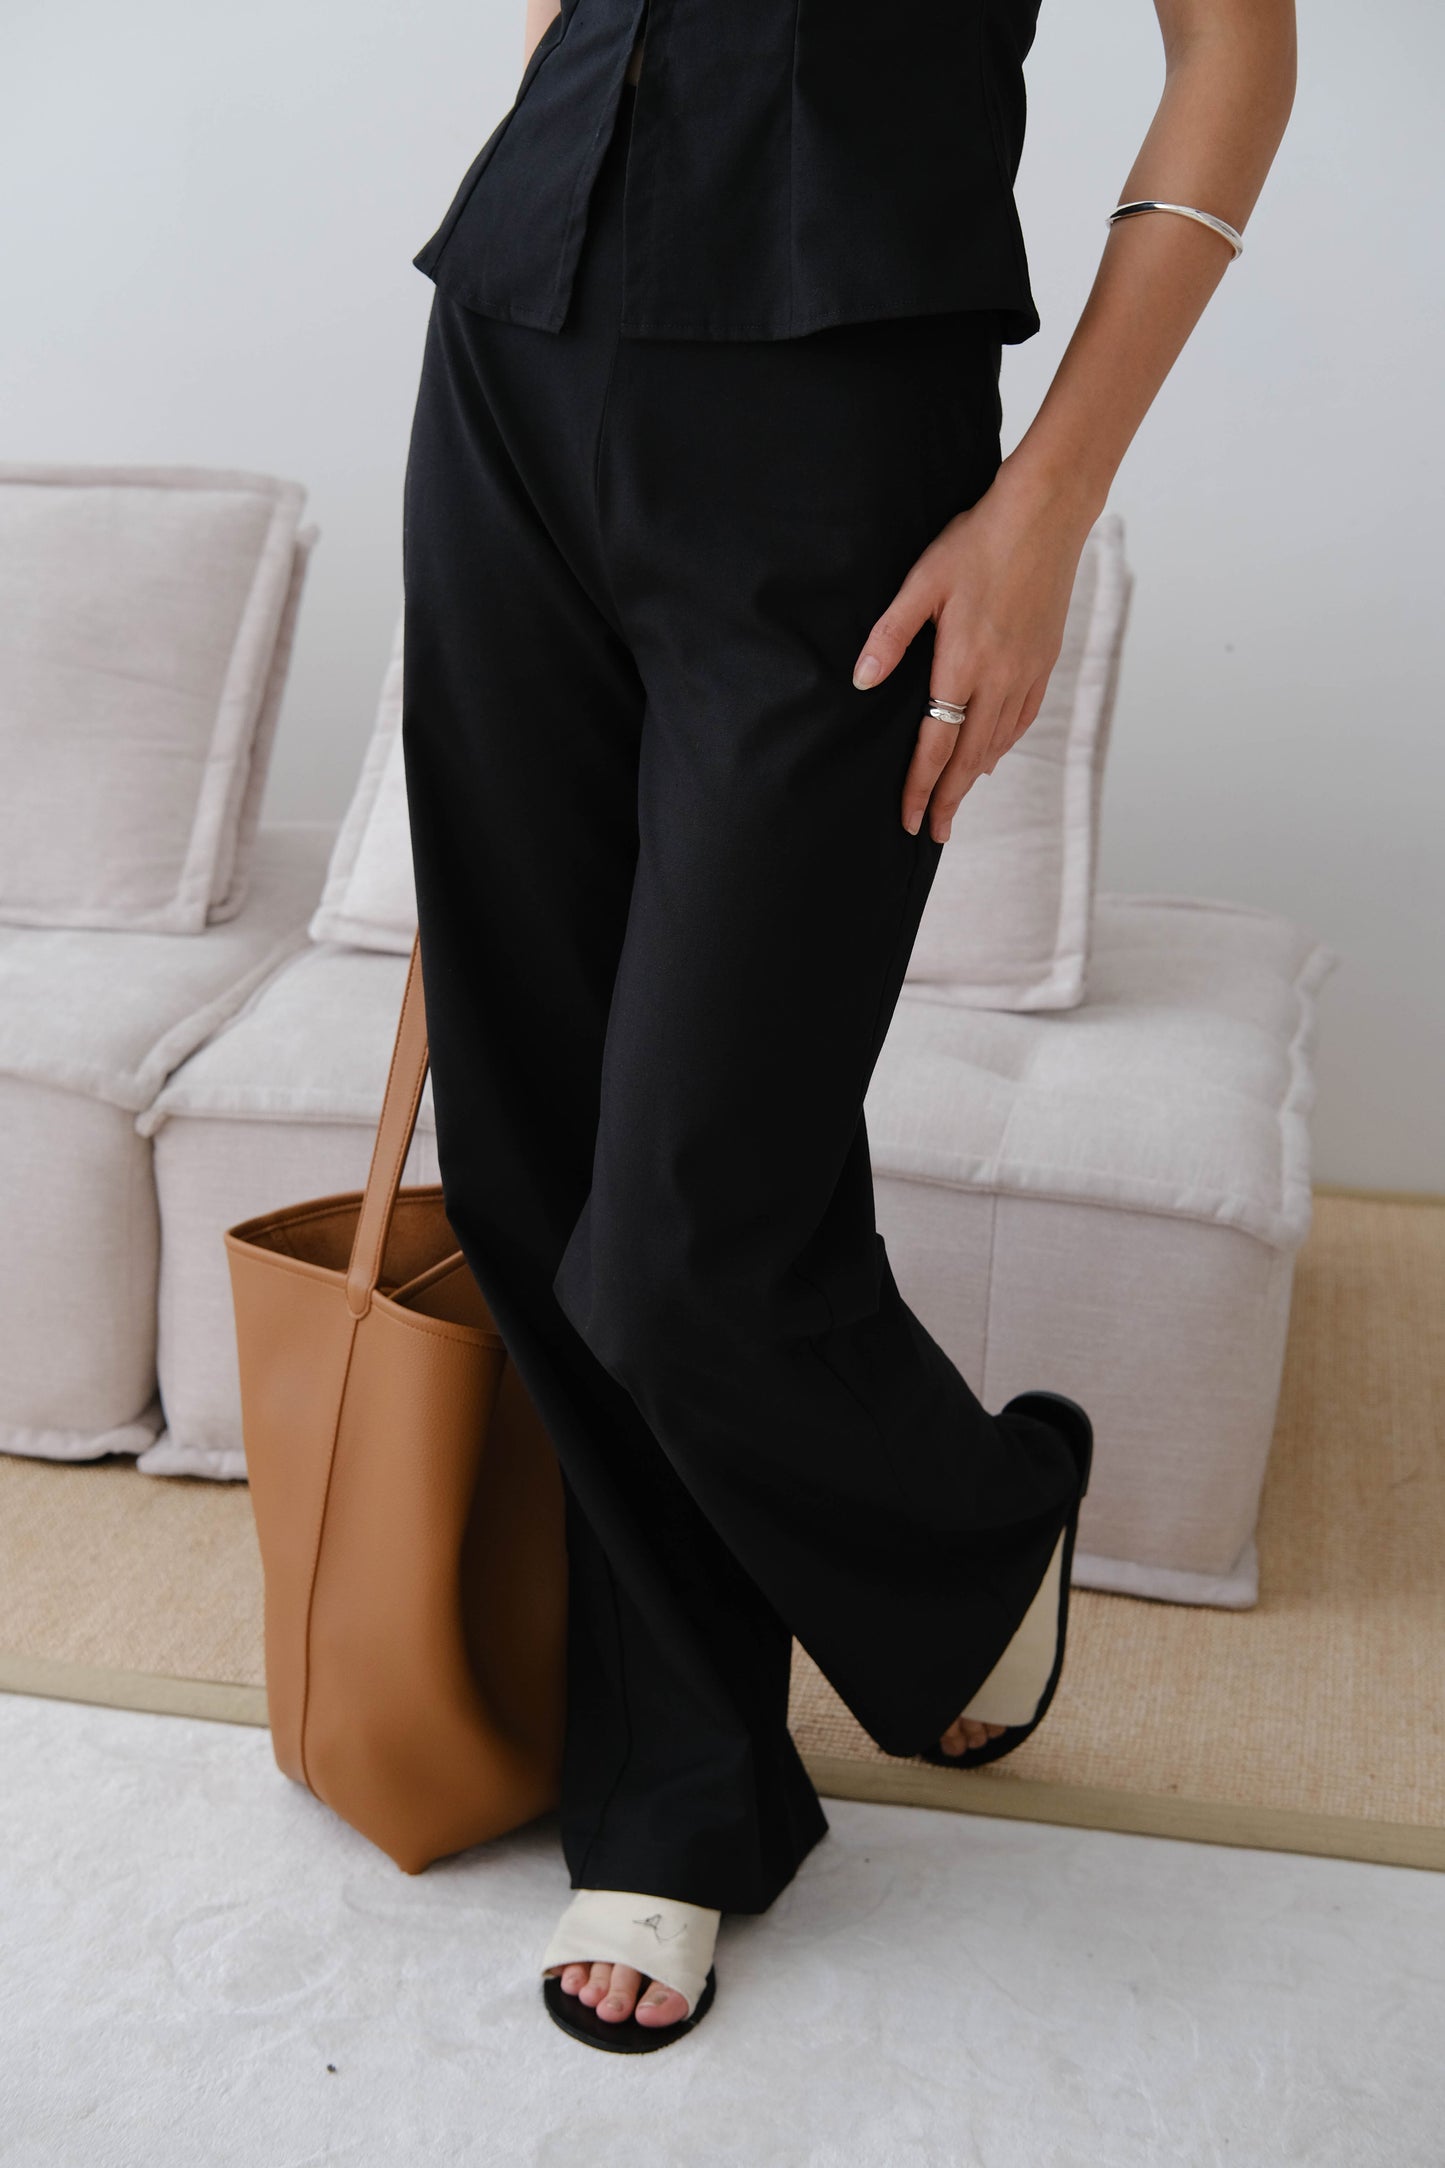 French cotton and linen sleeveless halter top + High waist trousers in classic black